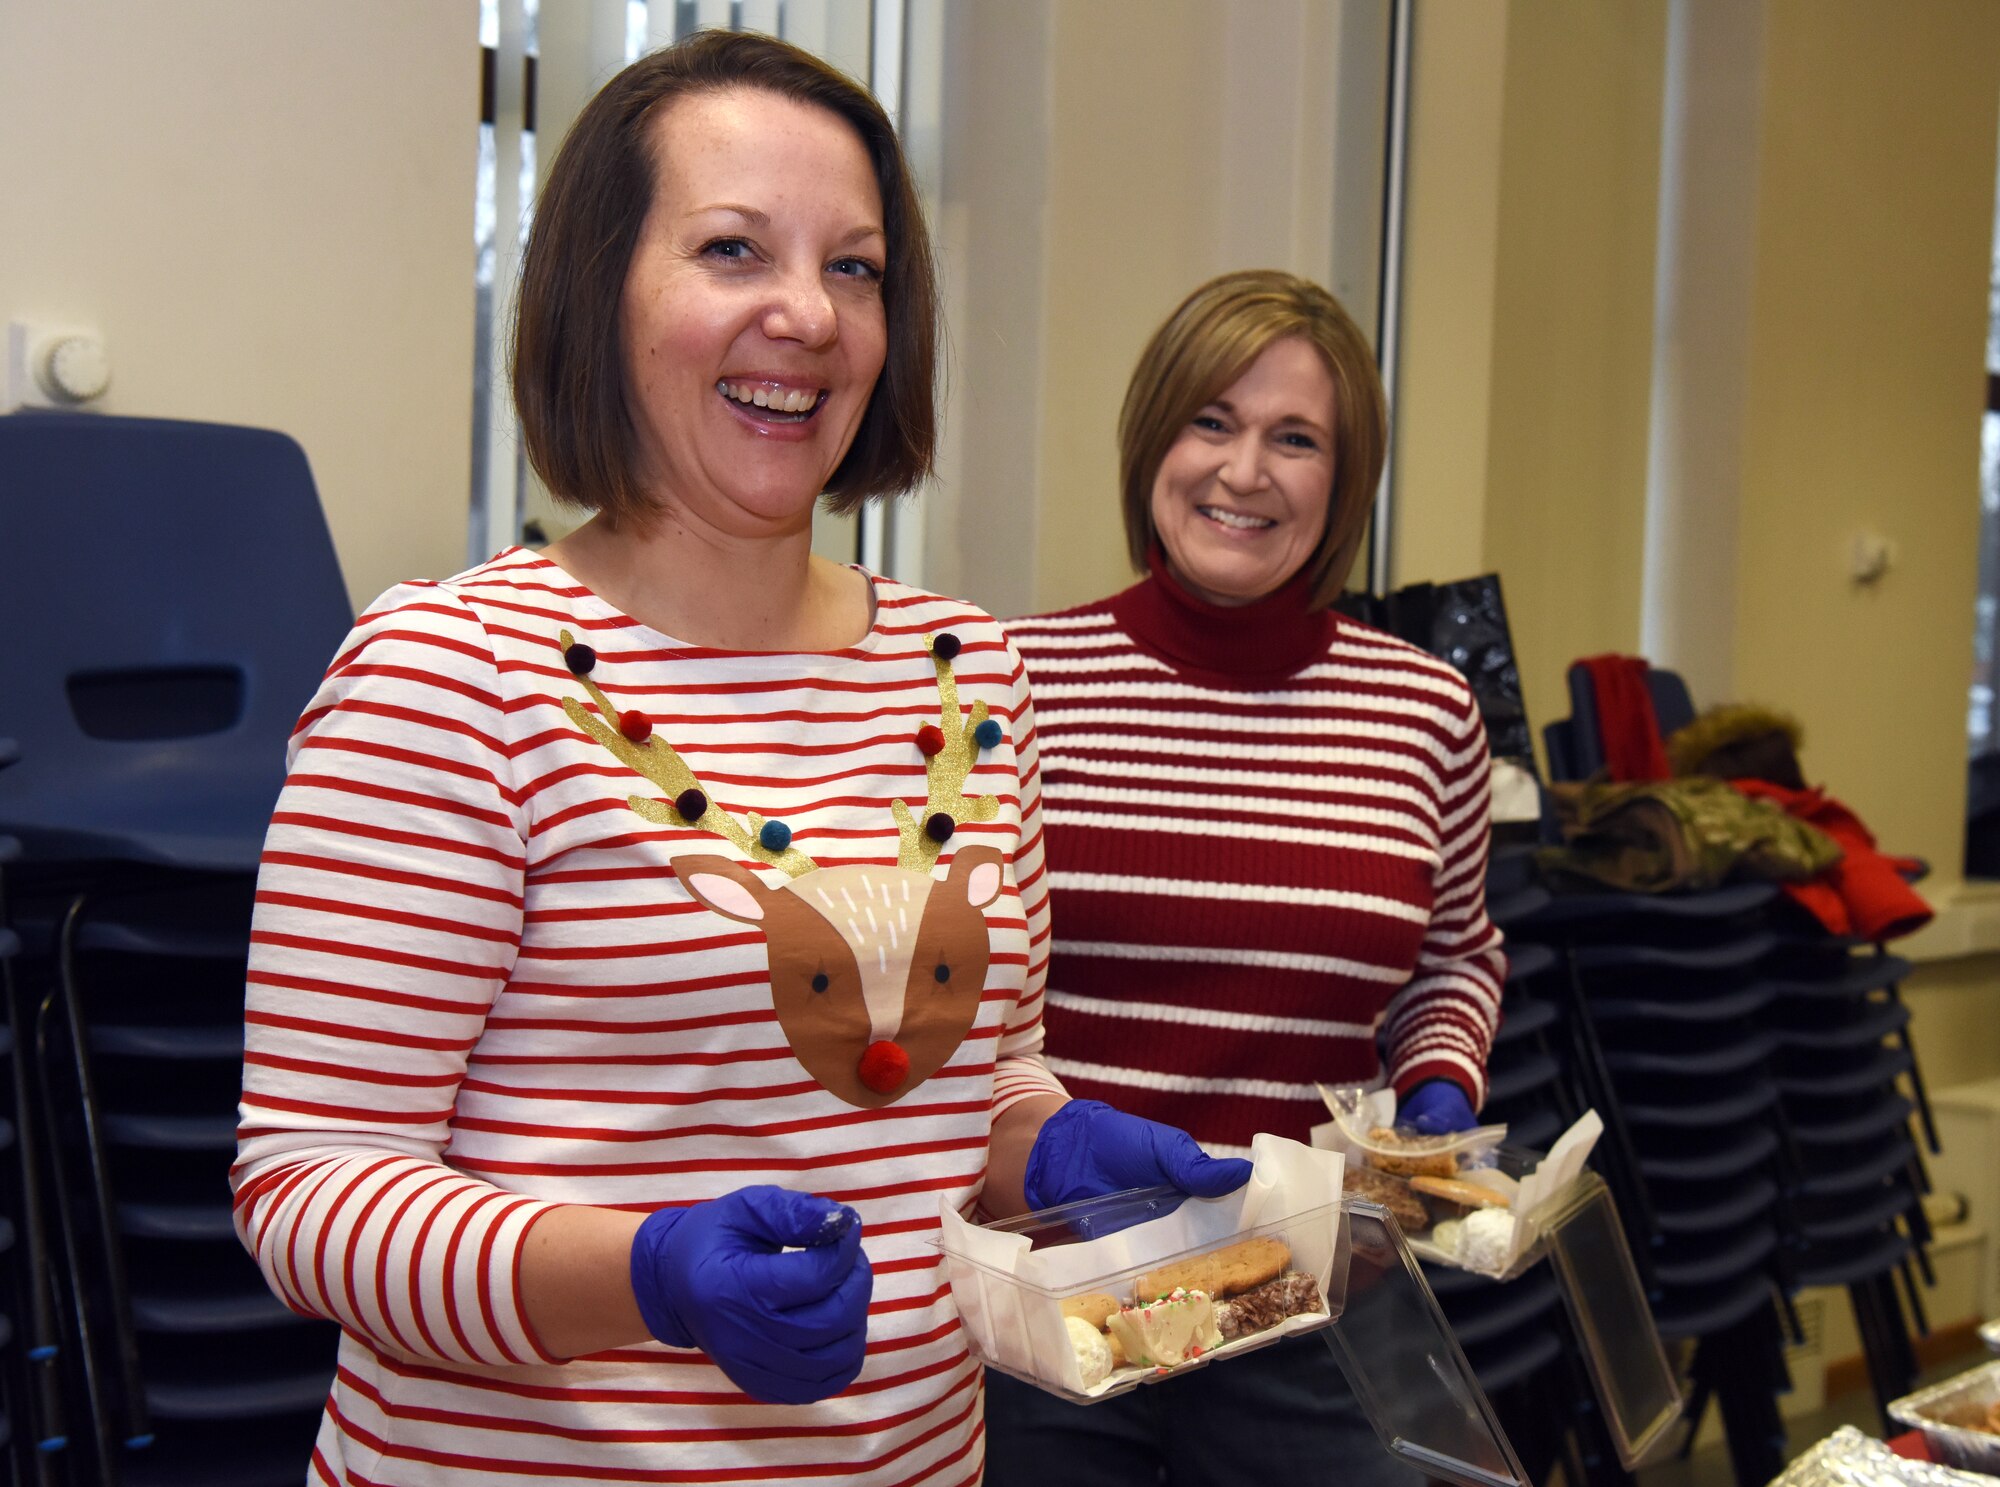 Team Mildenhall volunteers pose for a photo while packaging holiday cookies during the annual Holiday Cookie Drive at RAF Mildenhall, England, Dec. 12, 2019. The cookie drive takes place during the first part of December to provide base dorm residents a comforting taste of home. (U.S. Air Force photo by Senior Airman Brandon Esau)